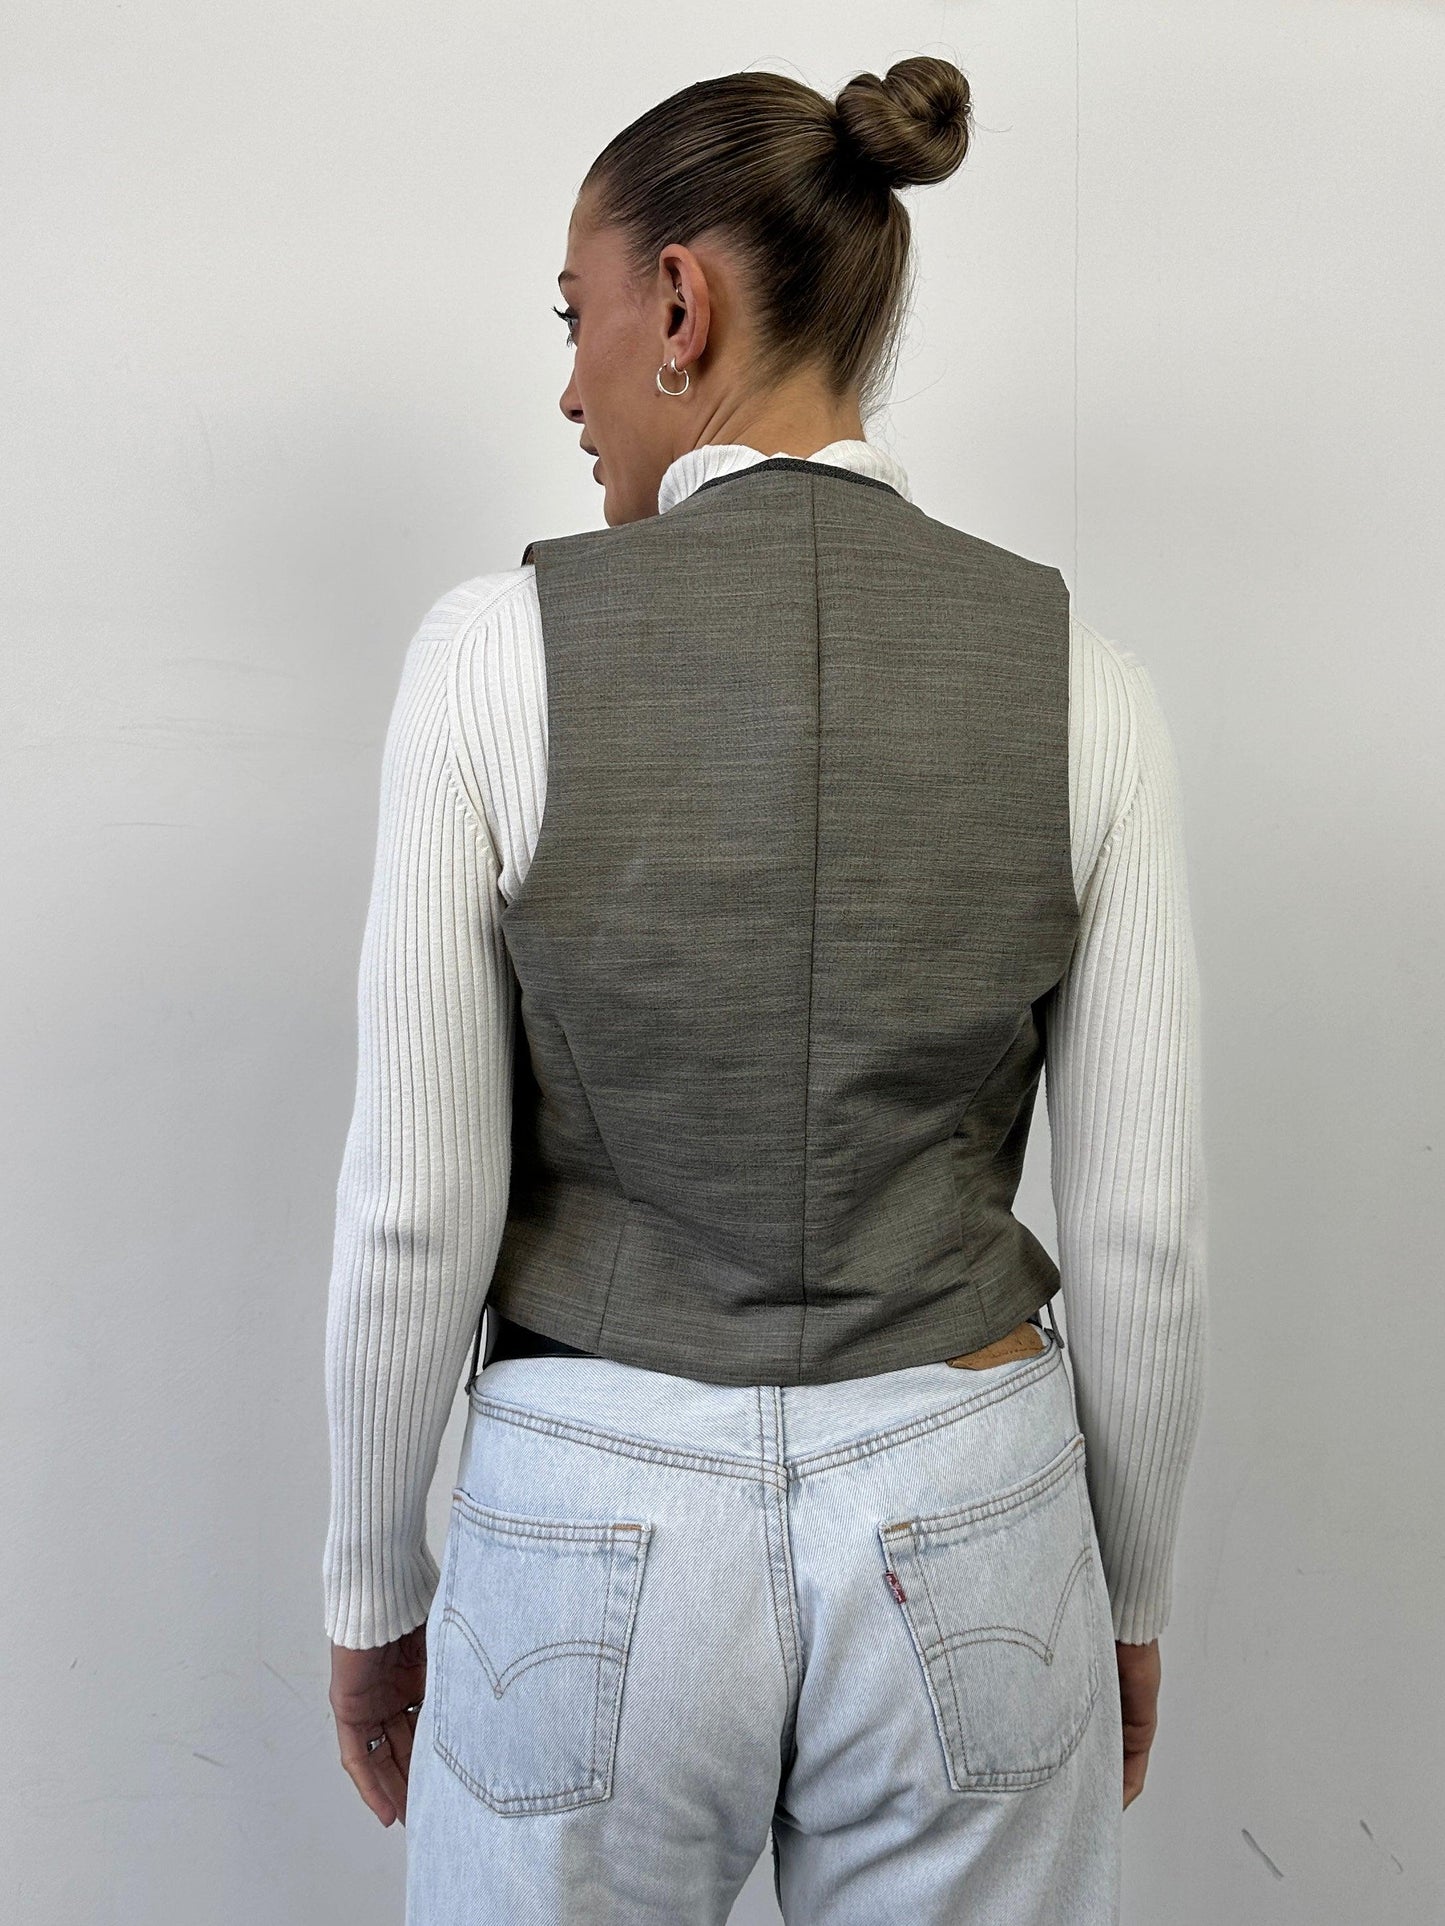 Vintage Wool Pinstripe Double Breasted Waistcoat - M - Known Source